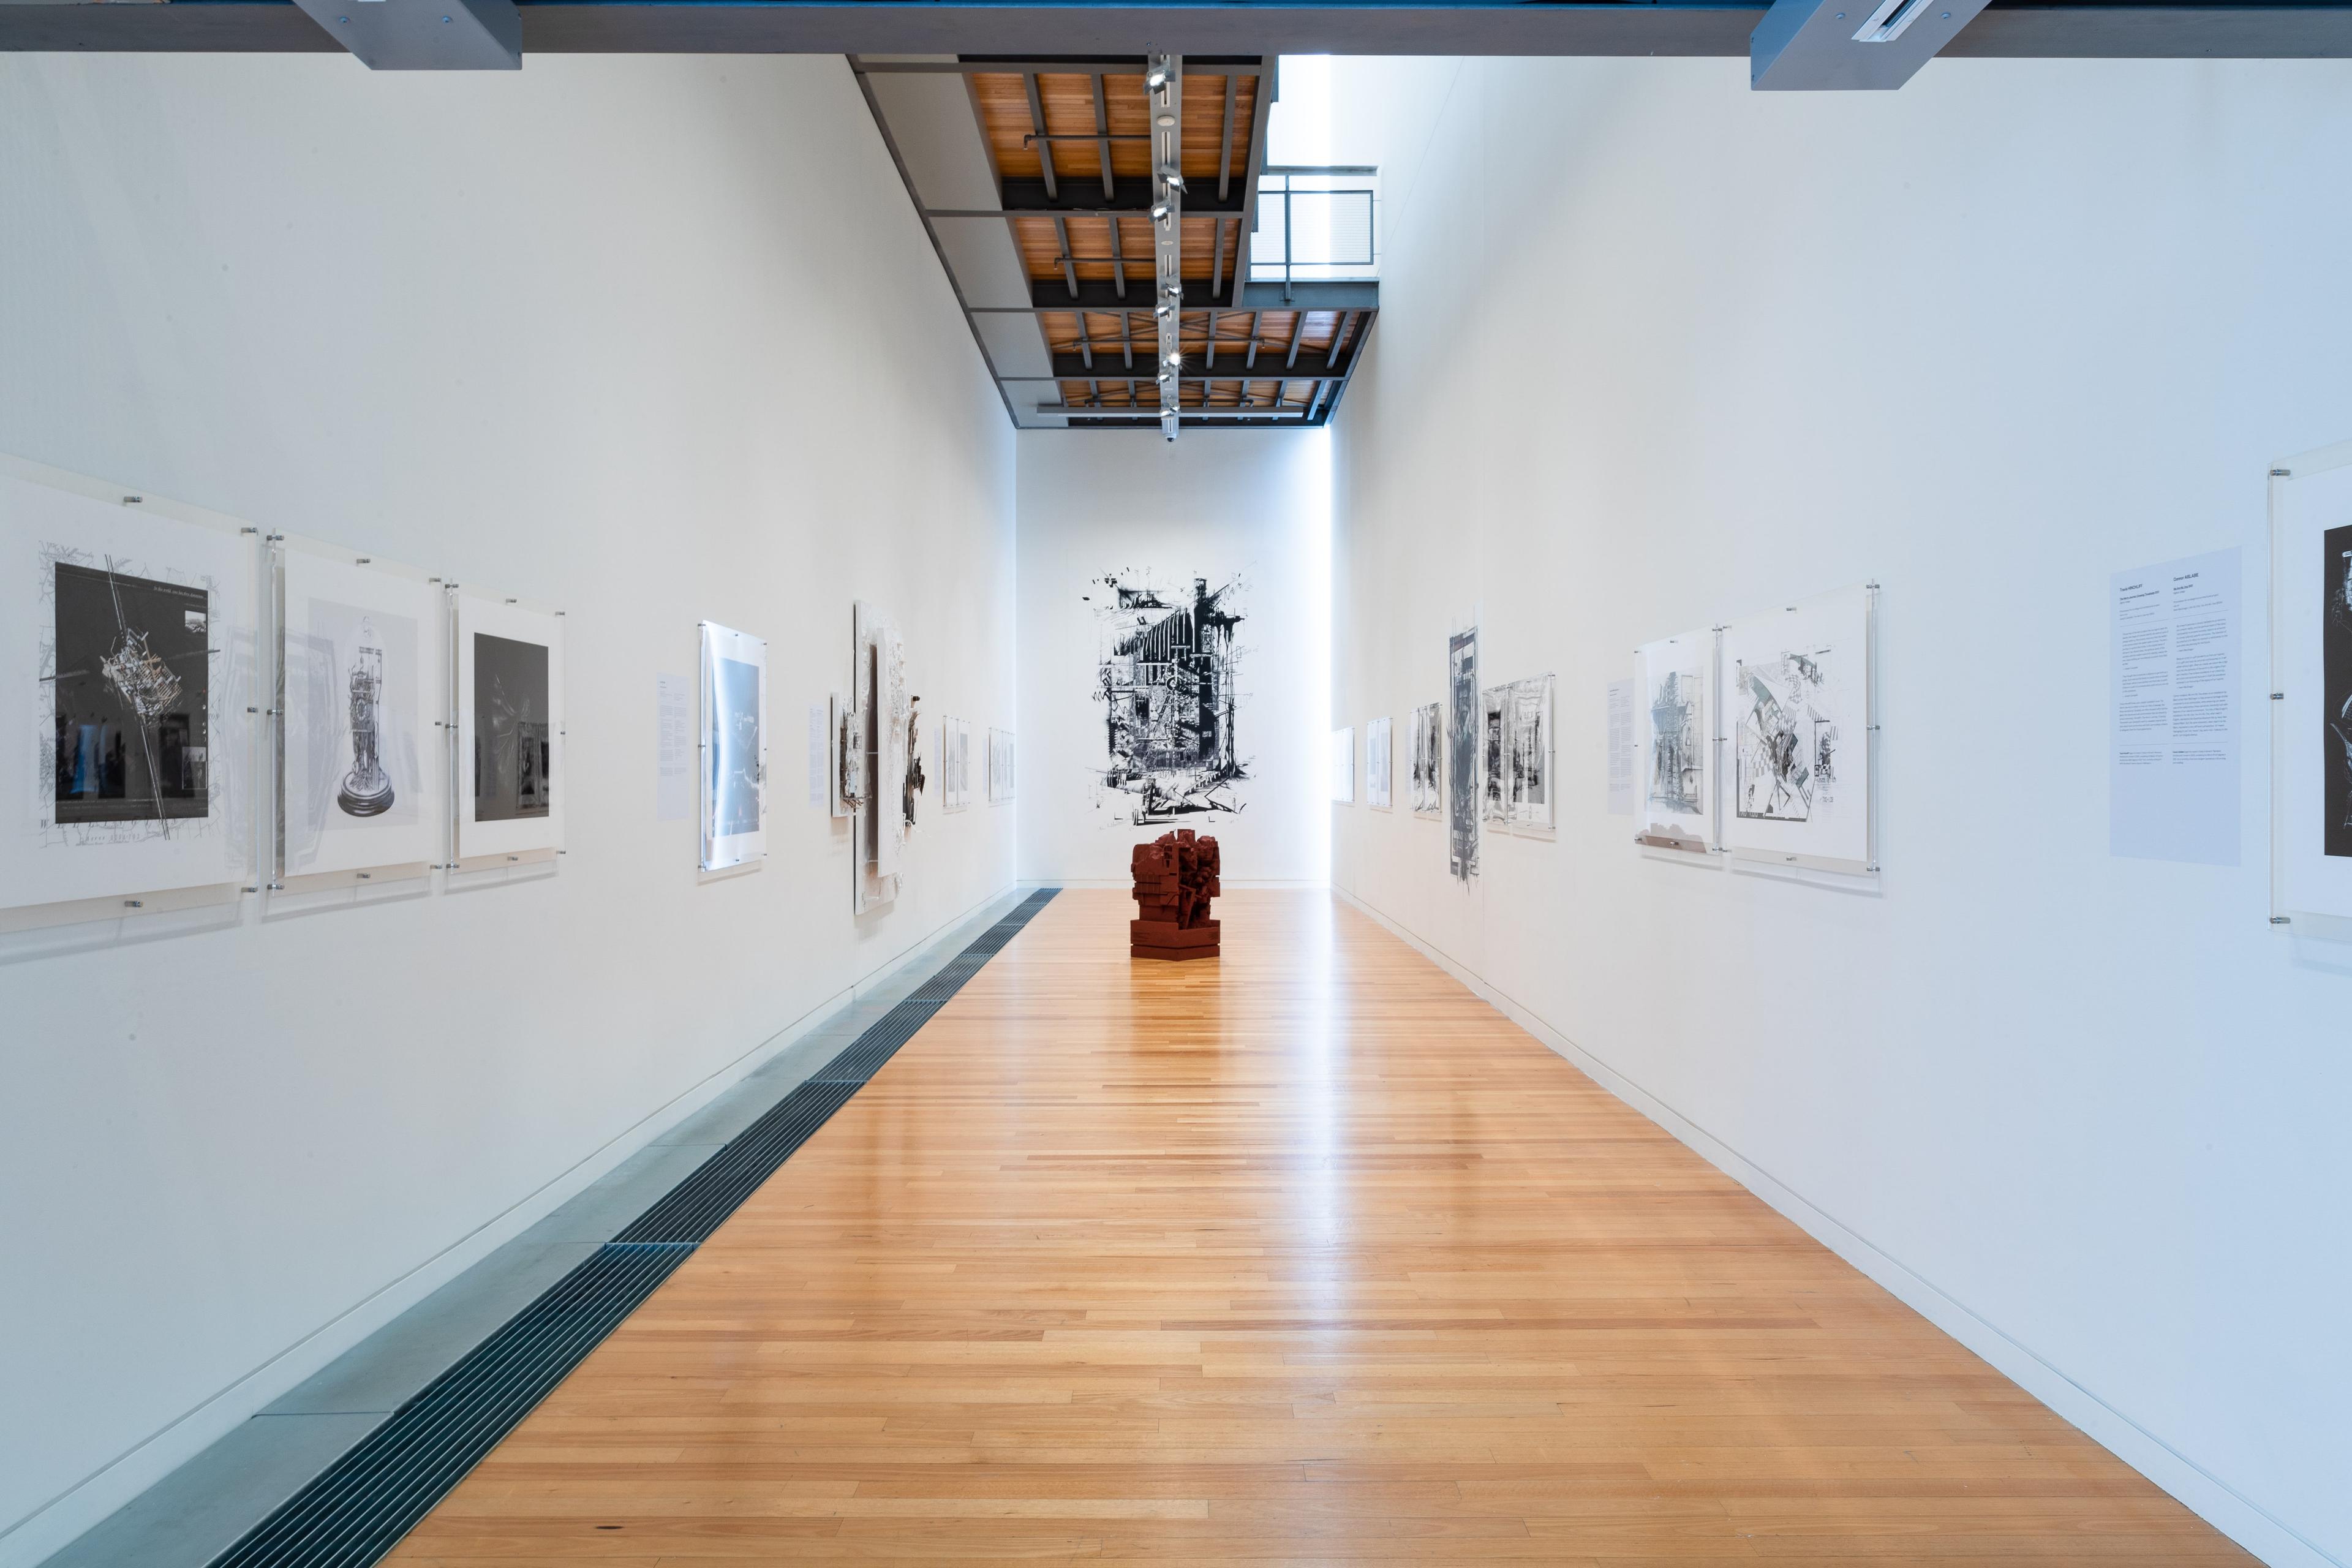 Wide view of a long gallery with text and artworks on the white walls and a dark red sculpture on the wooden floor. Daniel K. Brown 